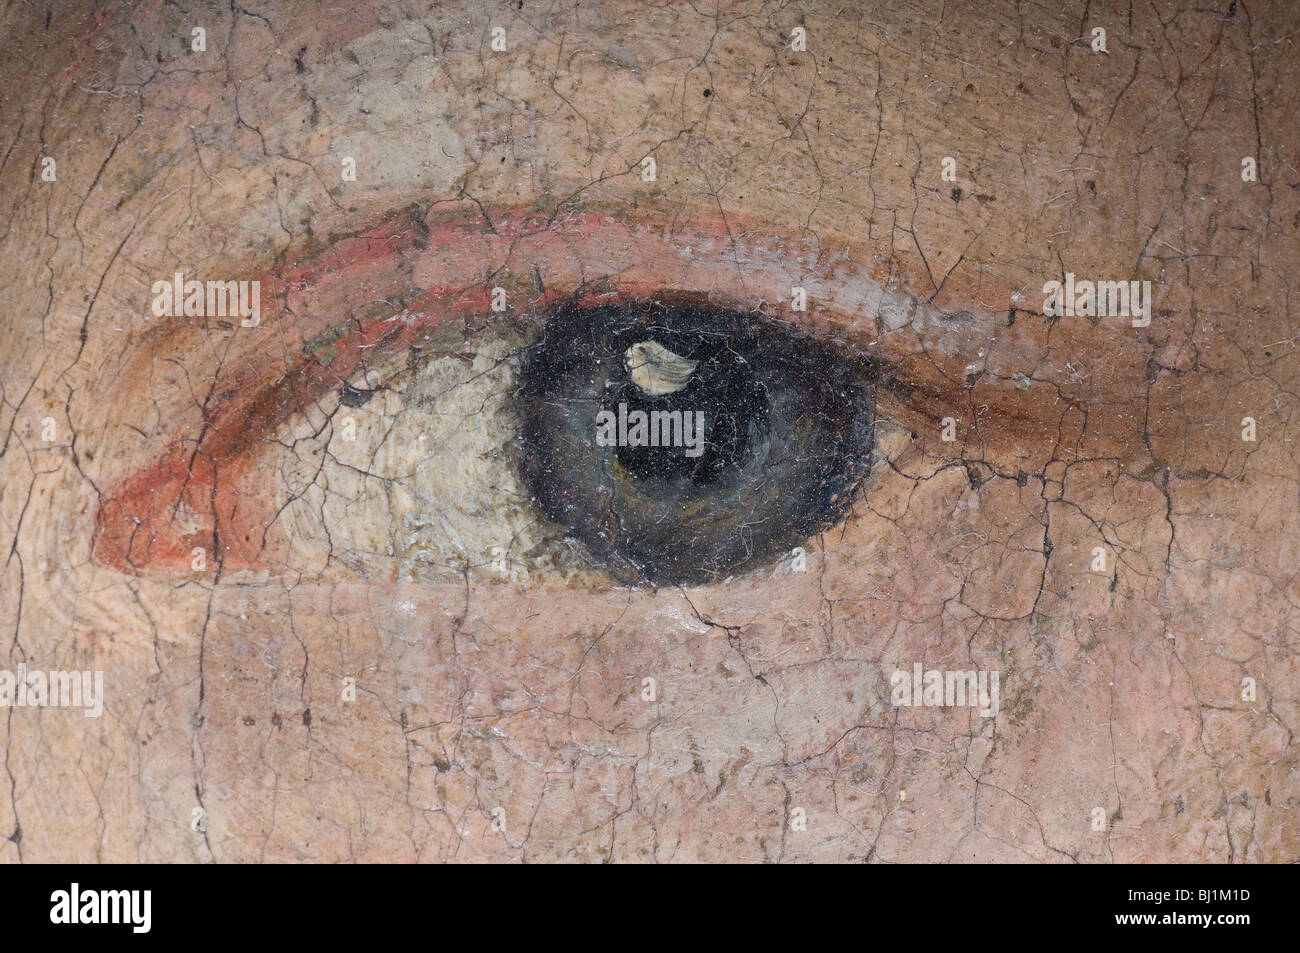 Detail of a woman's eye on an old baroque oil painting. Stock Photo